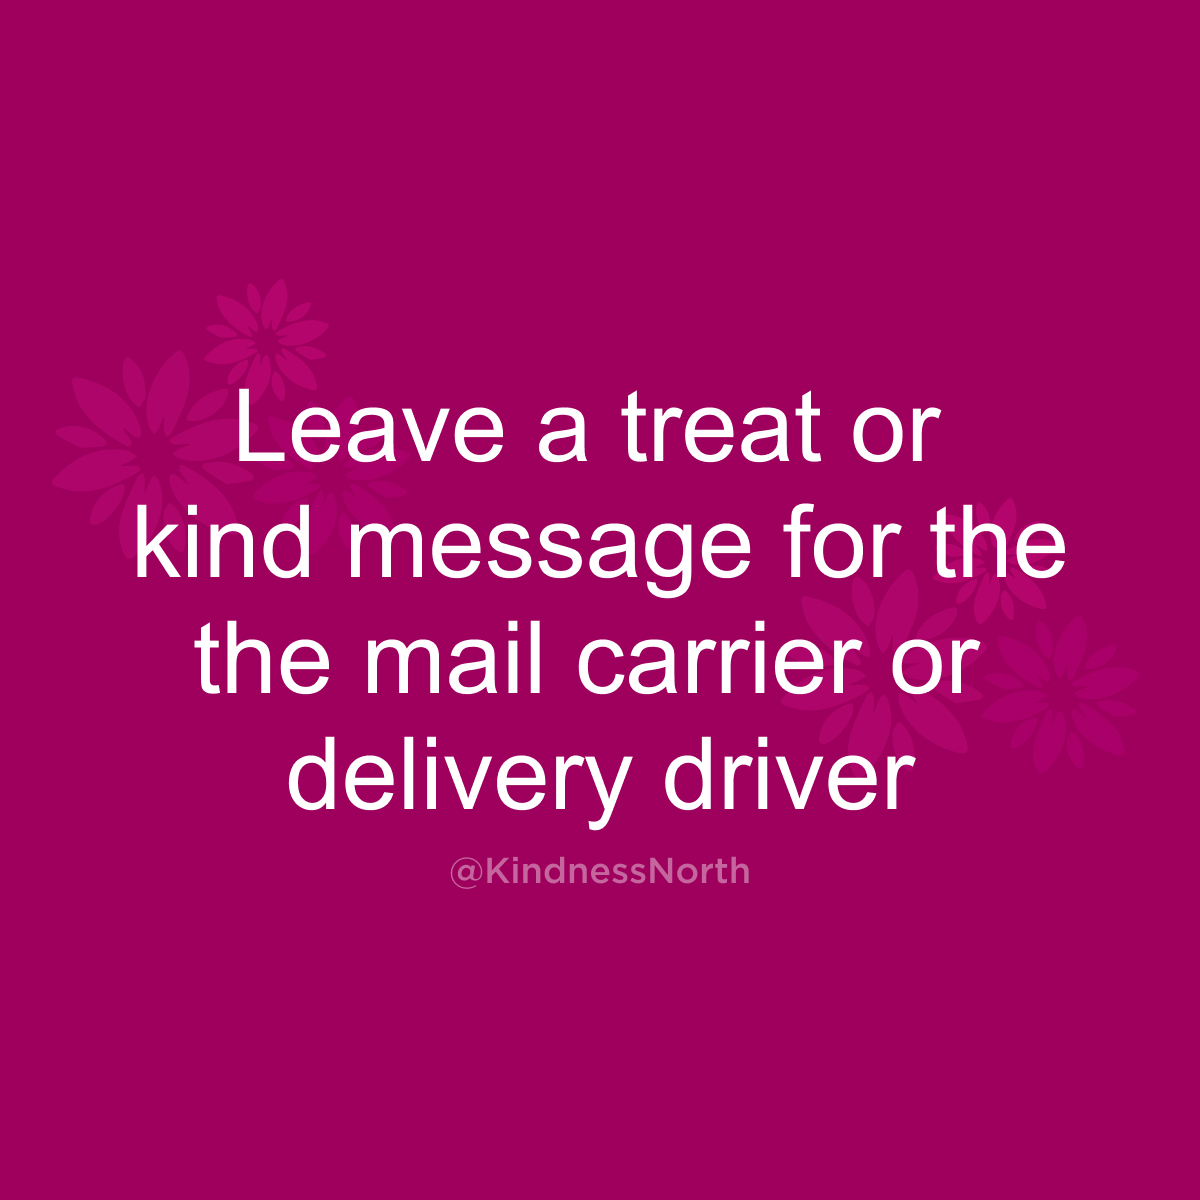 Leave a treat or kind message for the the mail carrier or delivery driver